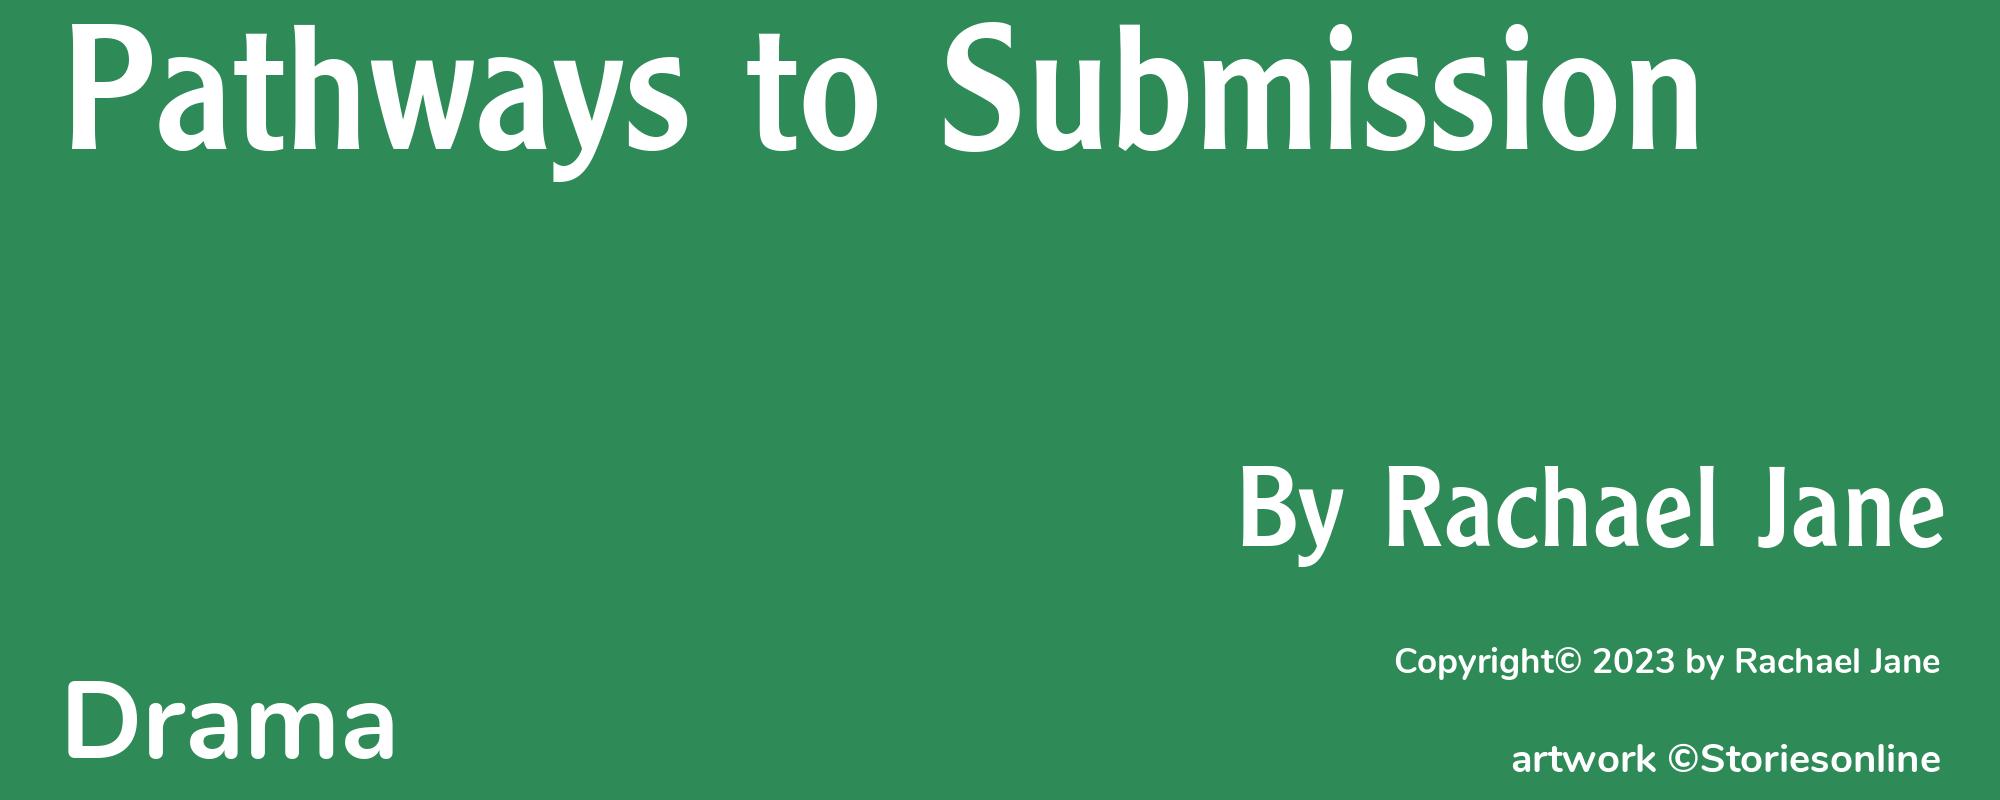 Pathways to Submission - Cover